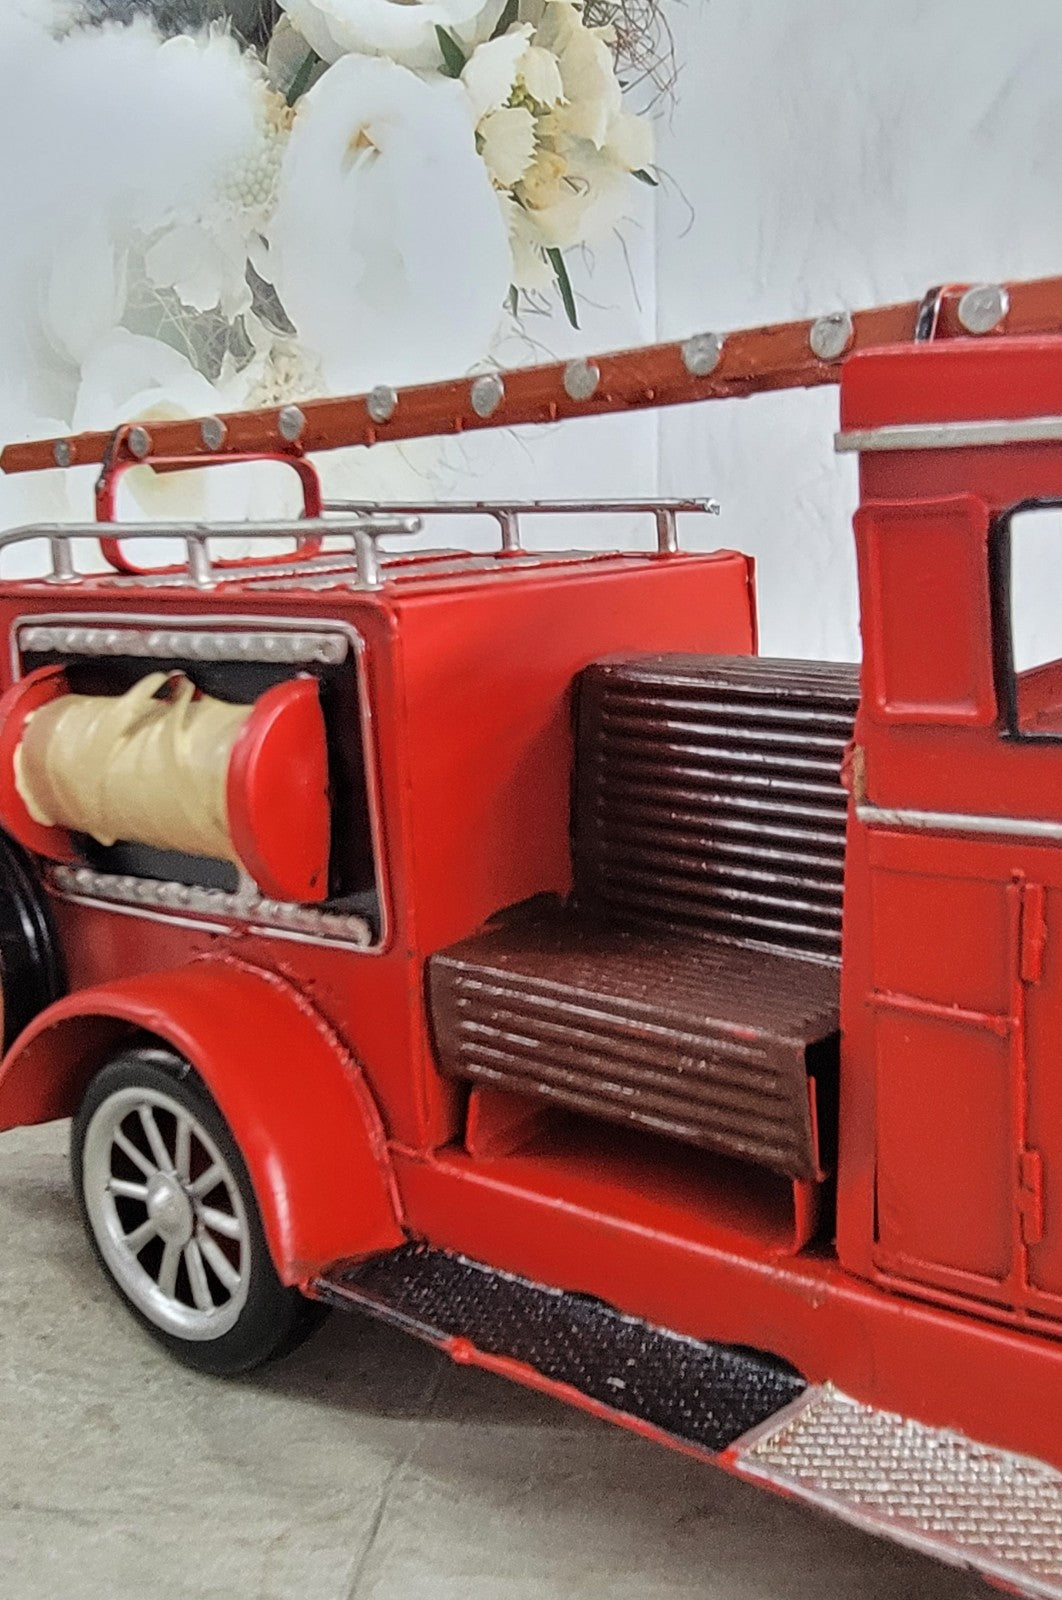 FIRE DEPARTMENT SO PRAIRIE Pumper FIRE TRUCK F.D.N.Y. HANDCRAFTED DETAILED CLASSIC ARTWORK